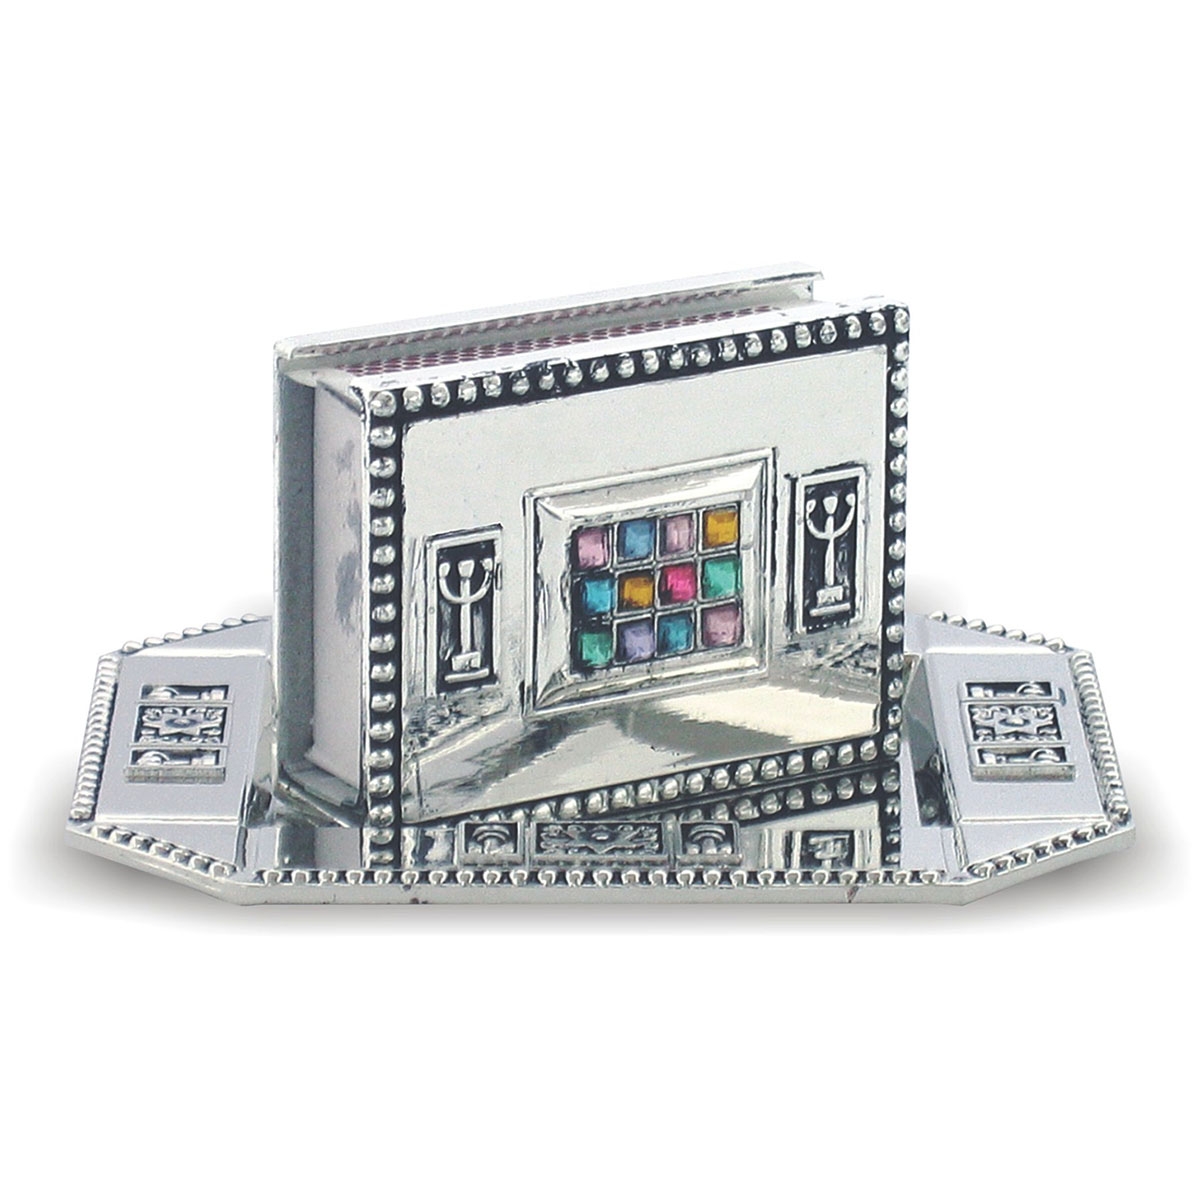 Hoshen and Star of David Nickel Tray and Matches Holder  - 1